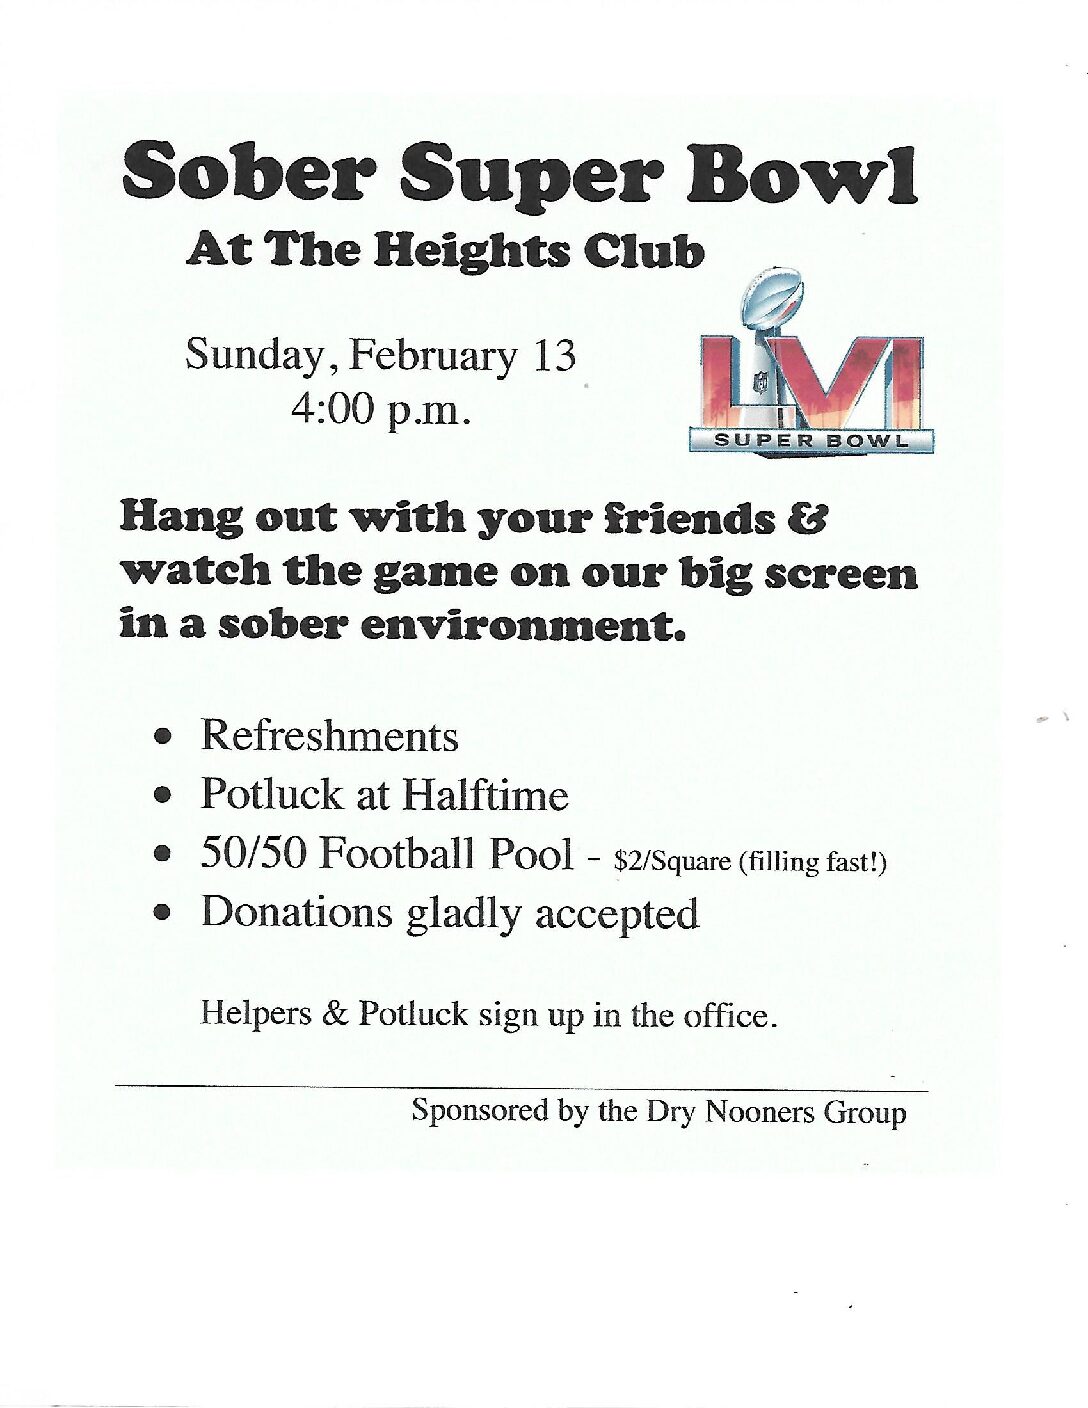 Super Bowl at the Heights Club